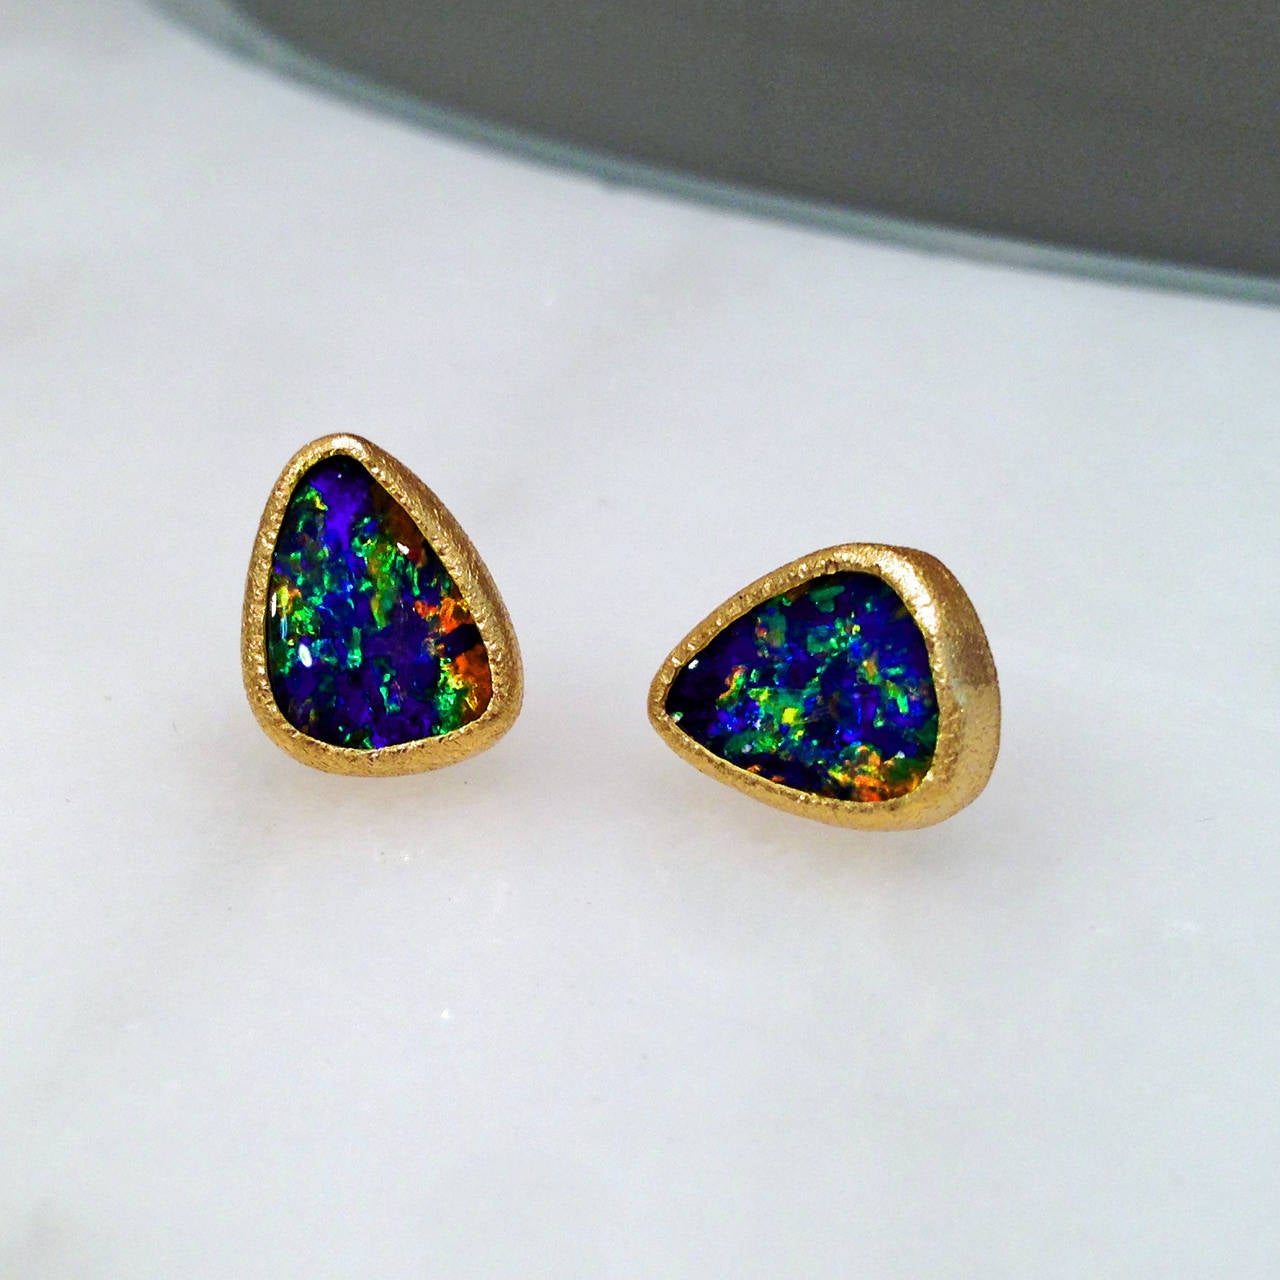 One of a Kind Earrings handcrafted in 22k yellow gold with exceptional, fiery opal doublets displaying electrifying flashes of red, orange, yellow, green, blue and purple. Truly extraordinary intensity!